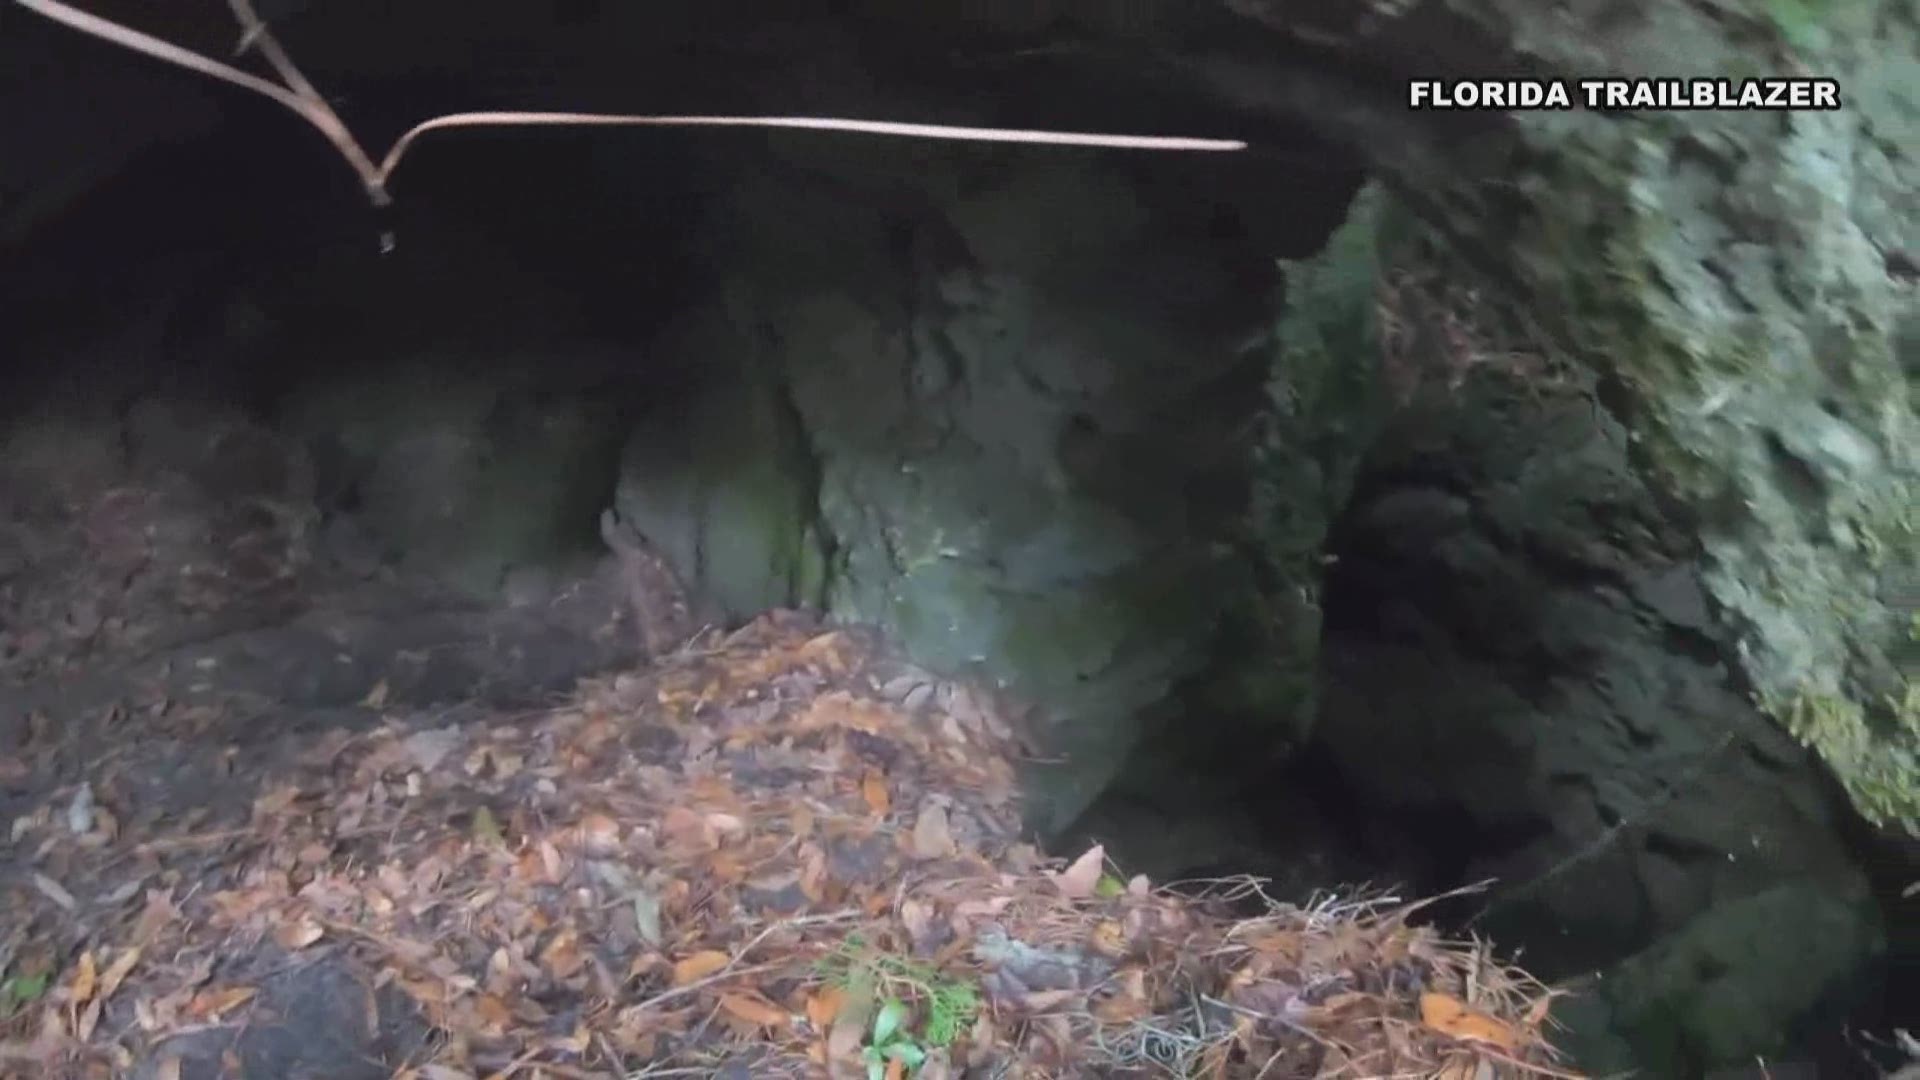 Florida Trailblazer took this video of a dog trapped in a cave and its rescue.